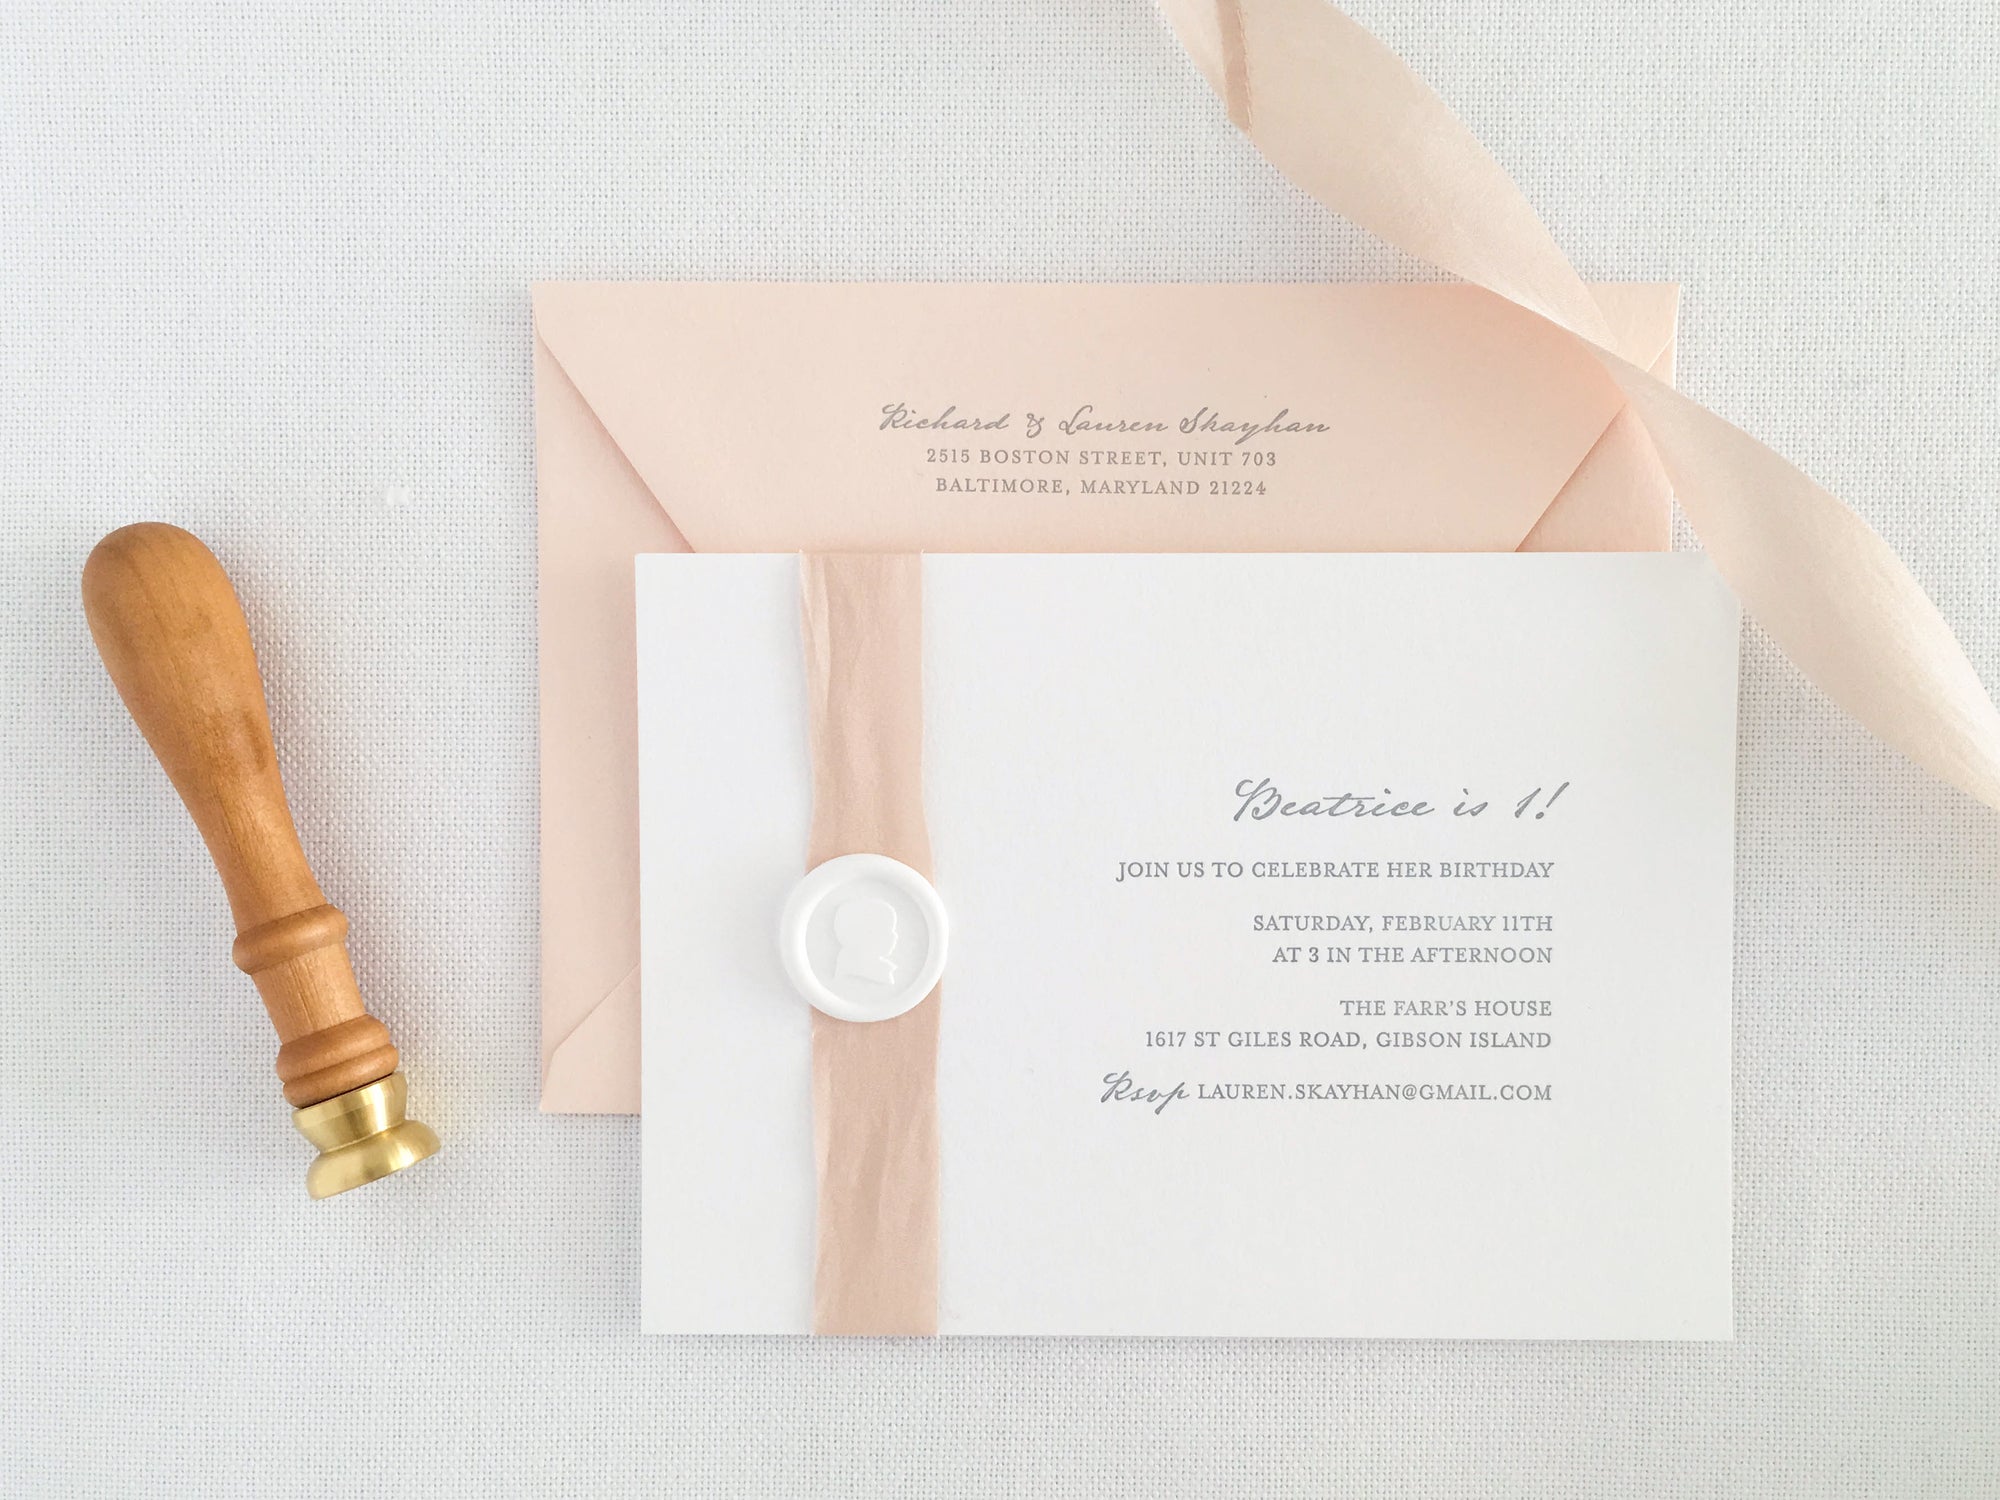 5 Ways To Make Your Invitations Stand Out